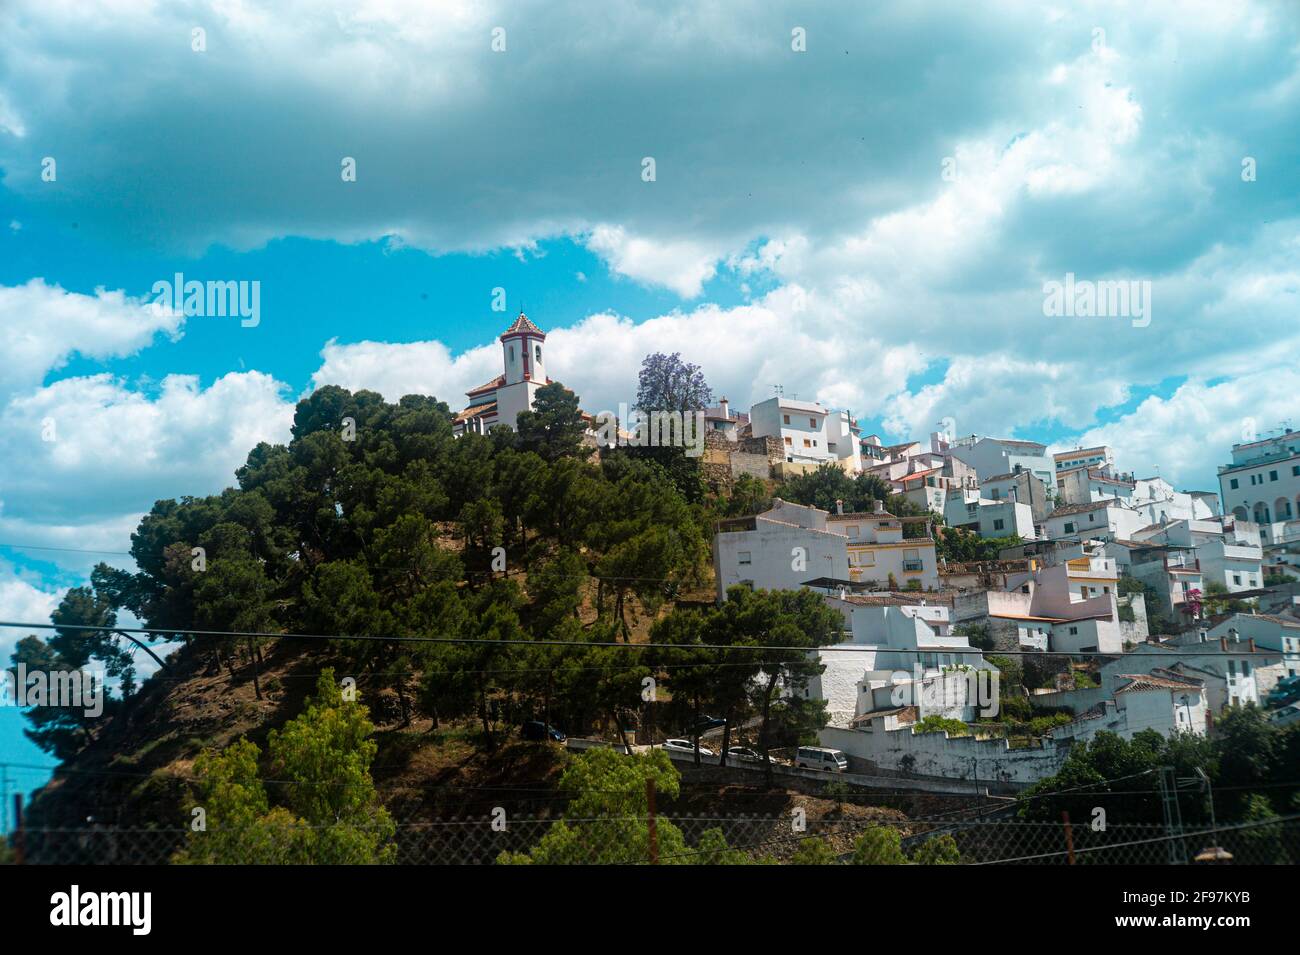 Spectacular View of the white town with the church at the top of the hill, Alozaina, Malaga Province, Andalusia, Spain, Western Europe. Stock Photo